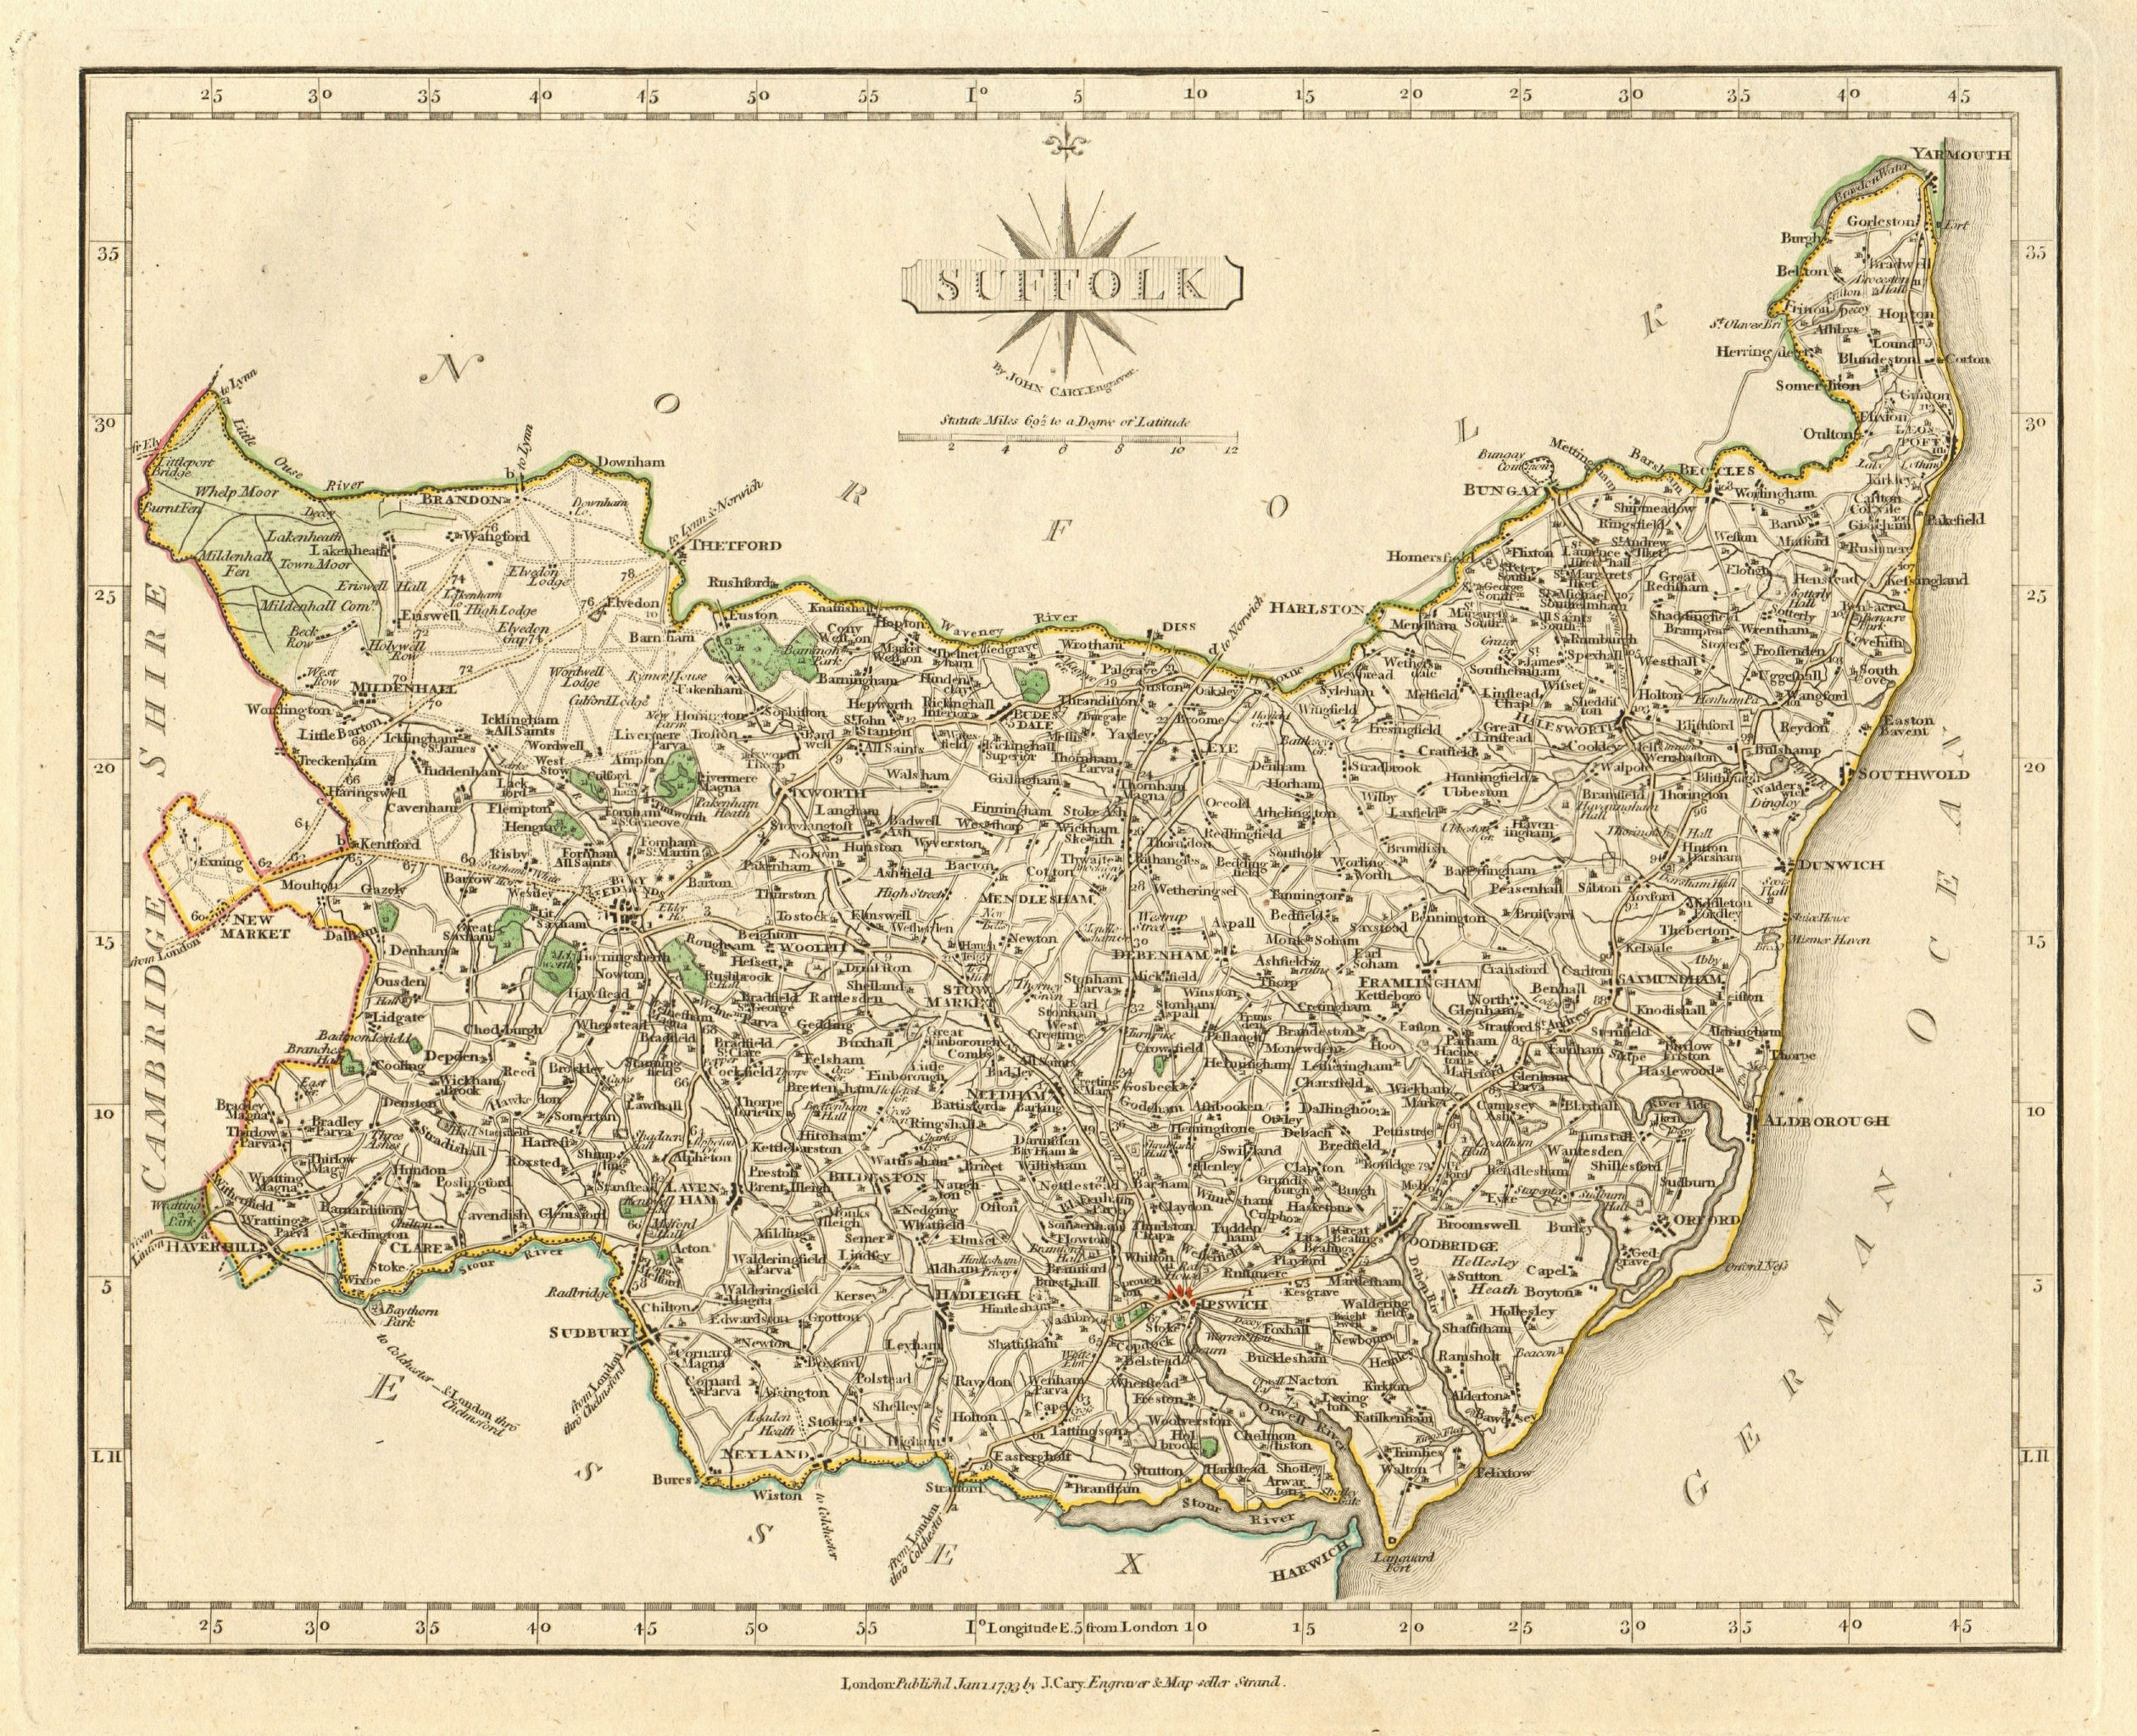 Associate Product Antique county map of SUFFOLK by JOHN CARY. Original outline colour 1793